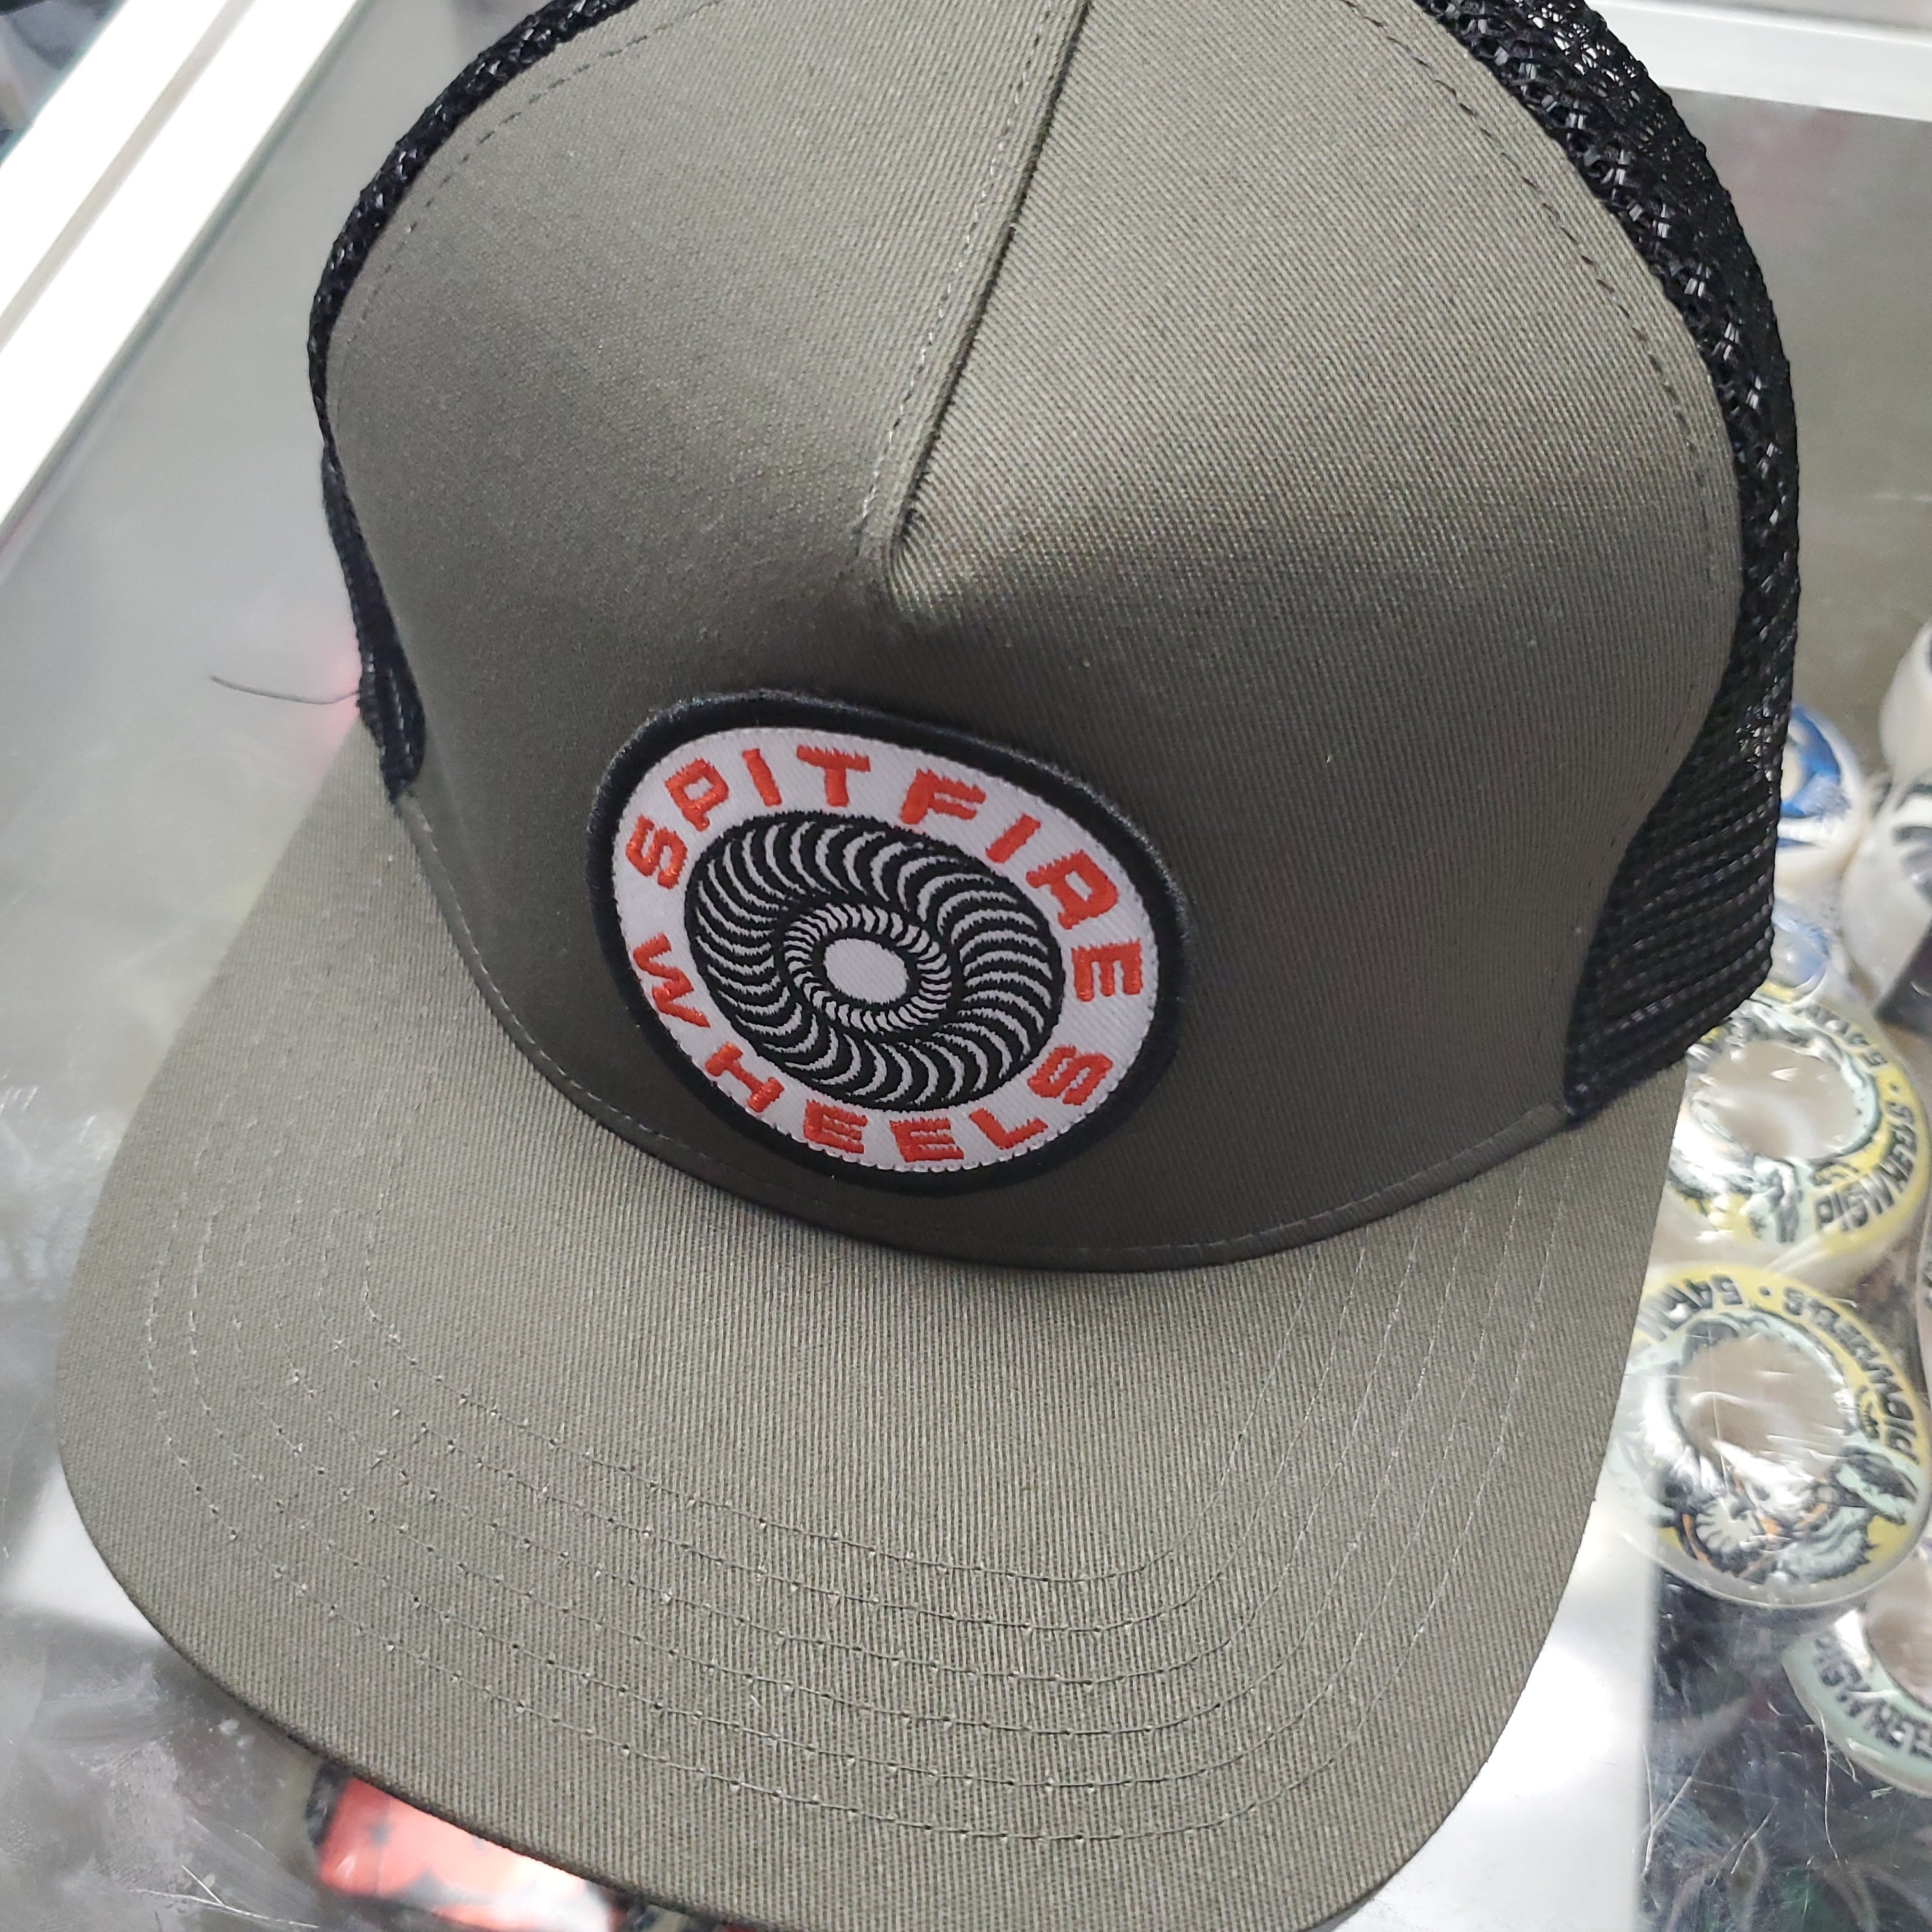 Spitfire Skateboard Hat Classic 87 Swirl patch Charcoal / Black - Invisible Board Shop